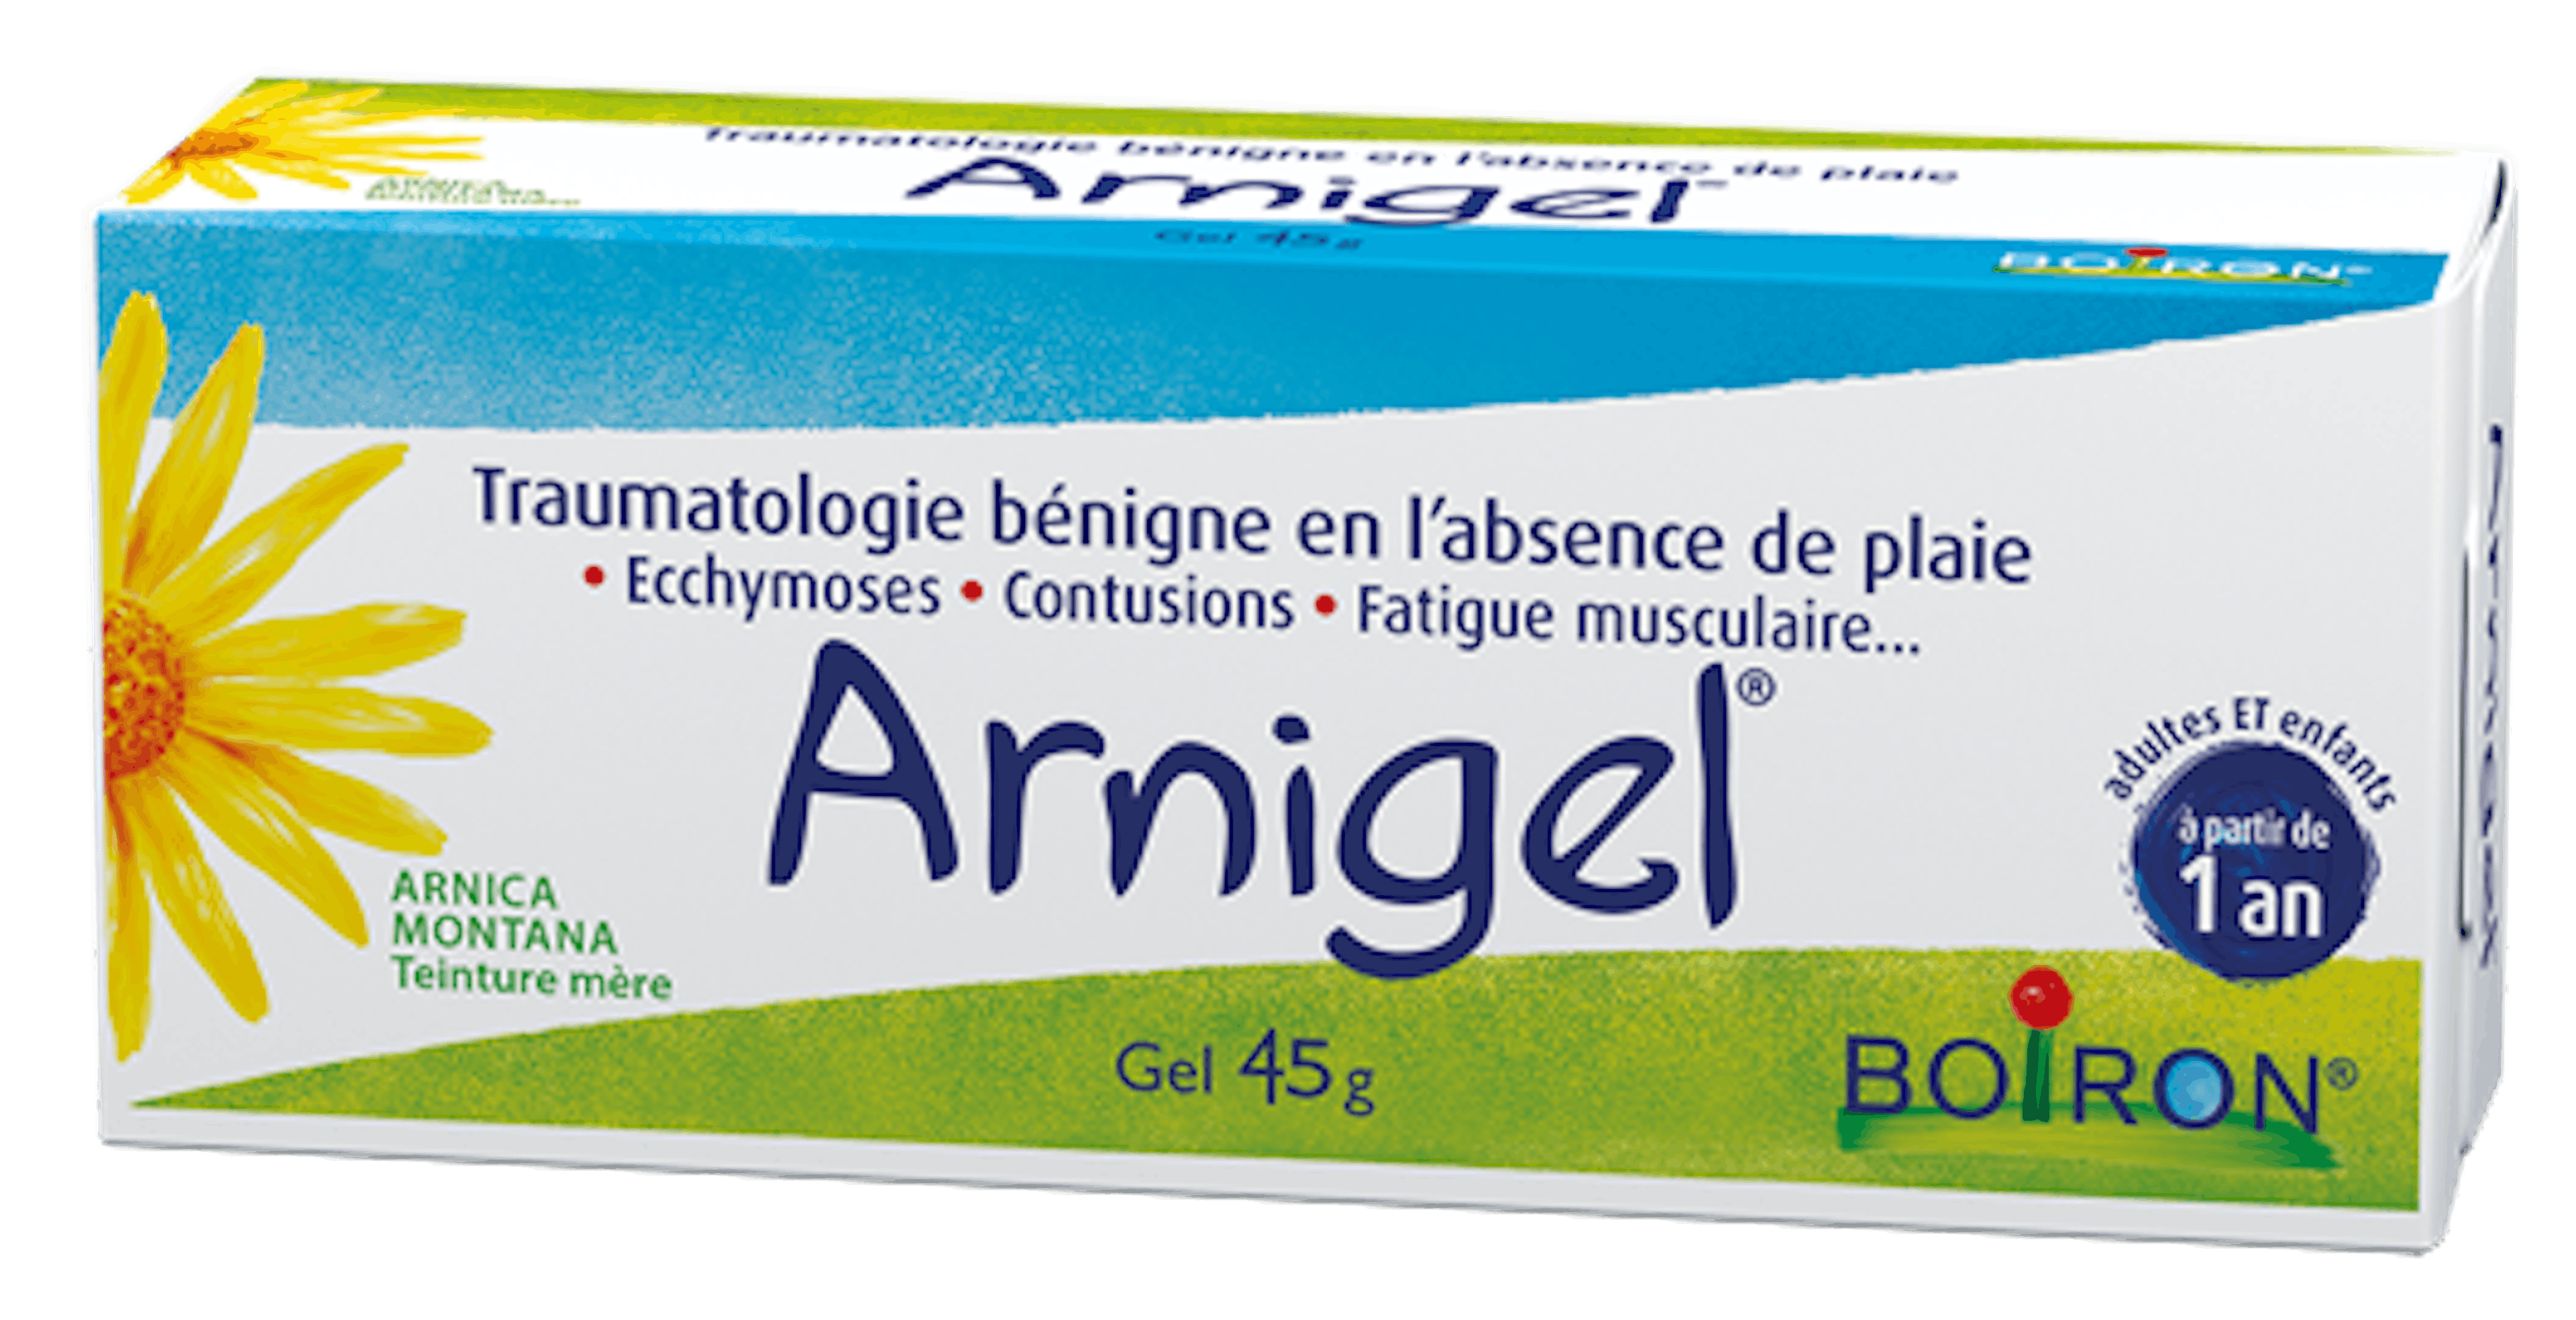 Homéopathie ecchymoses, contusions, fatigue musculaire - Arnigel® gel Boiron